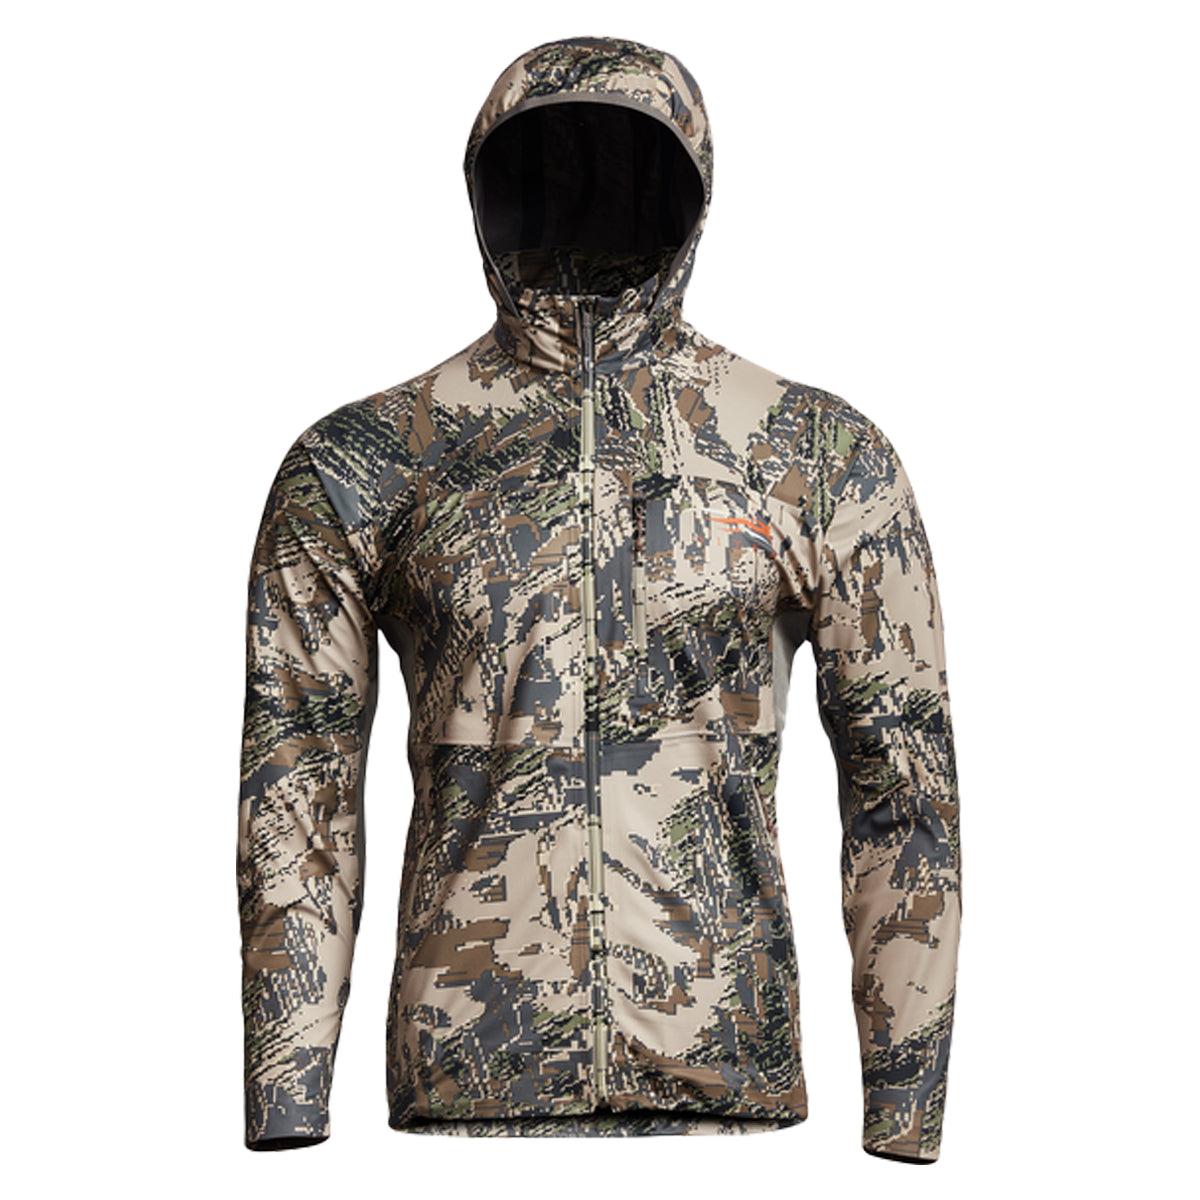 Sitka Mountain Evo Jacket in Optifade Open Country by GOHUNT | Sitka - GOHUNT Shop